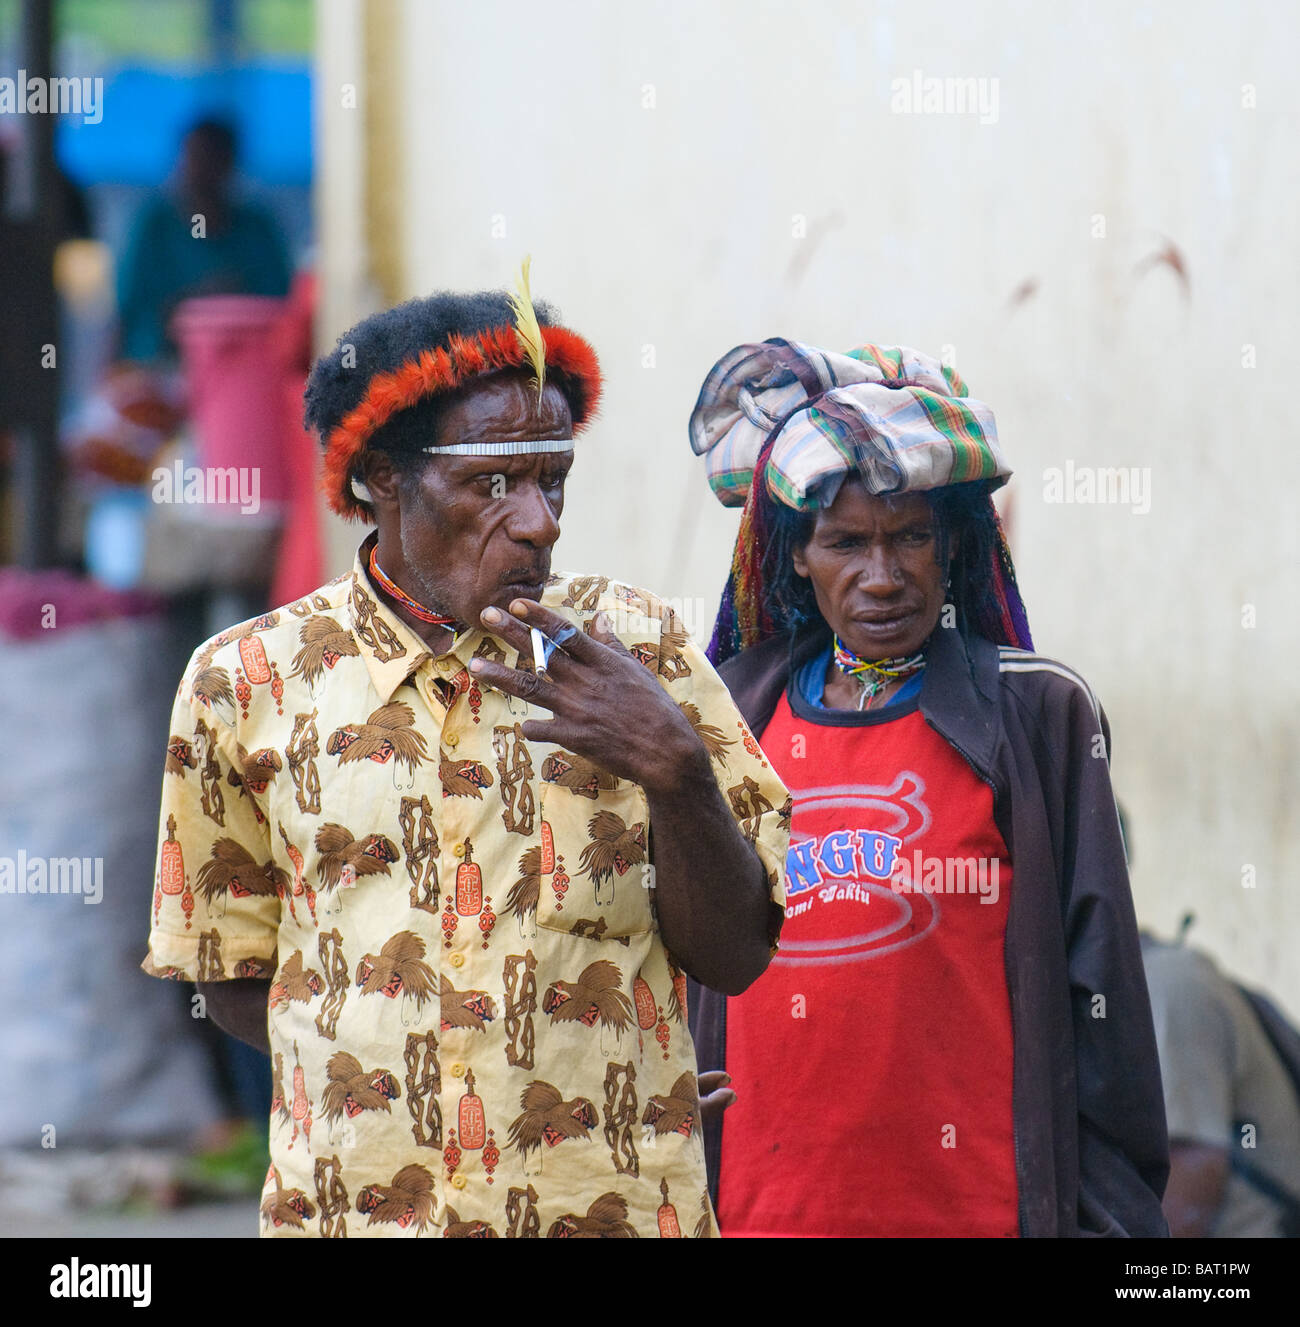 Papuan people in the market Wamena Papua Indonesia Stock Photo